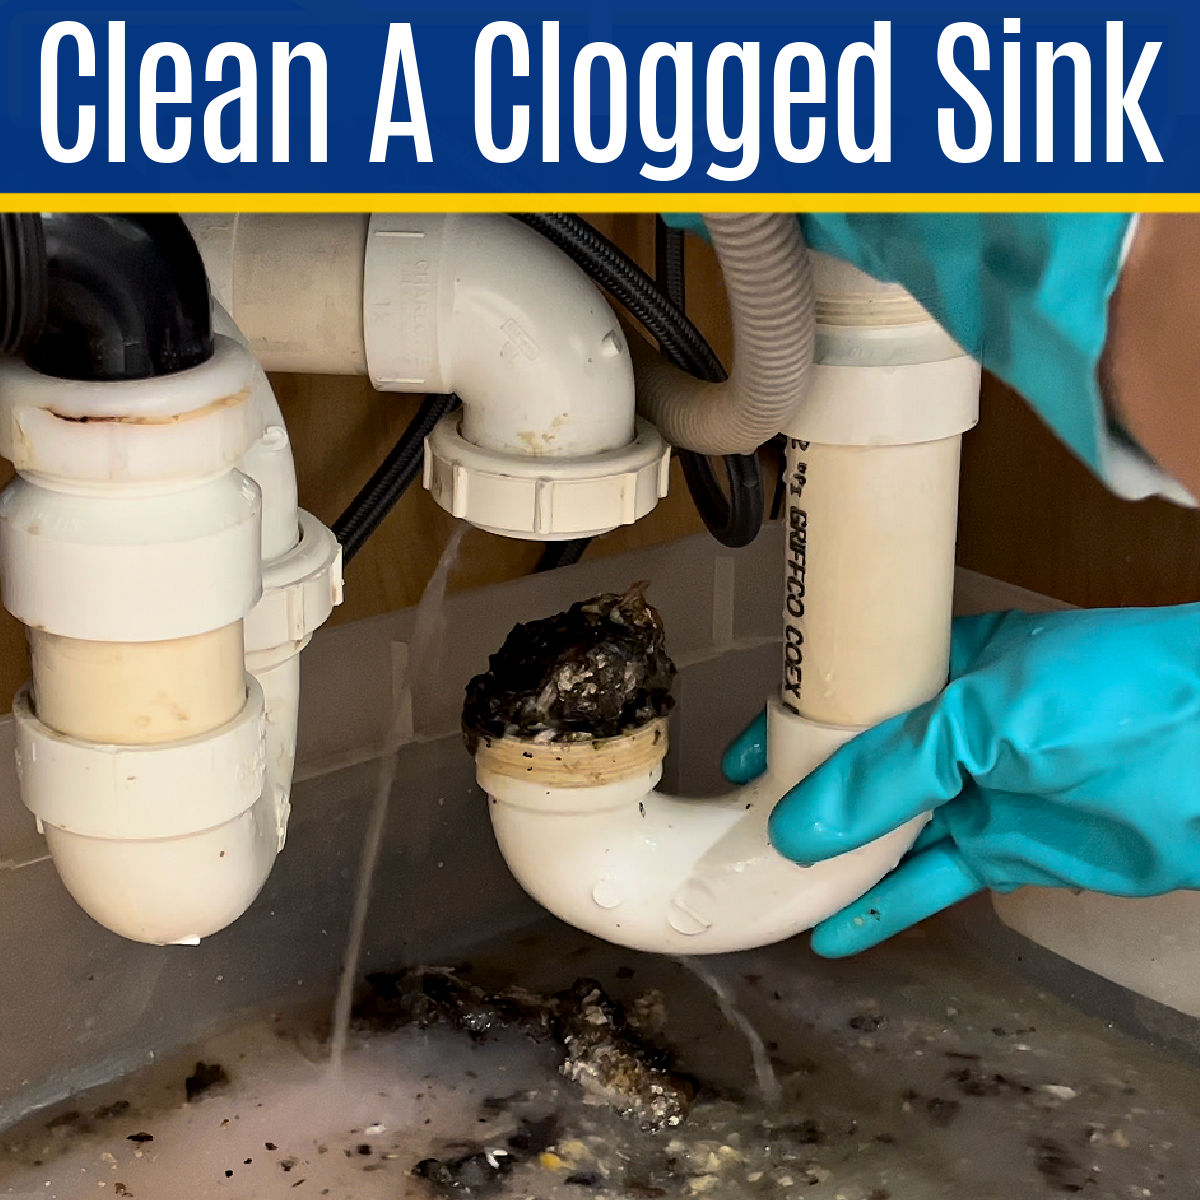 Why Is Your Bathroom Sink Clogged?